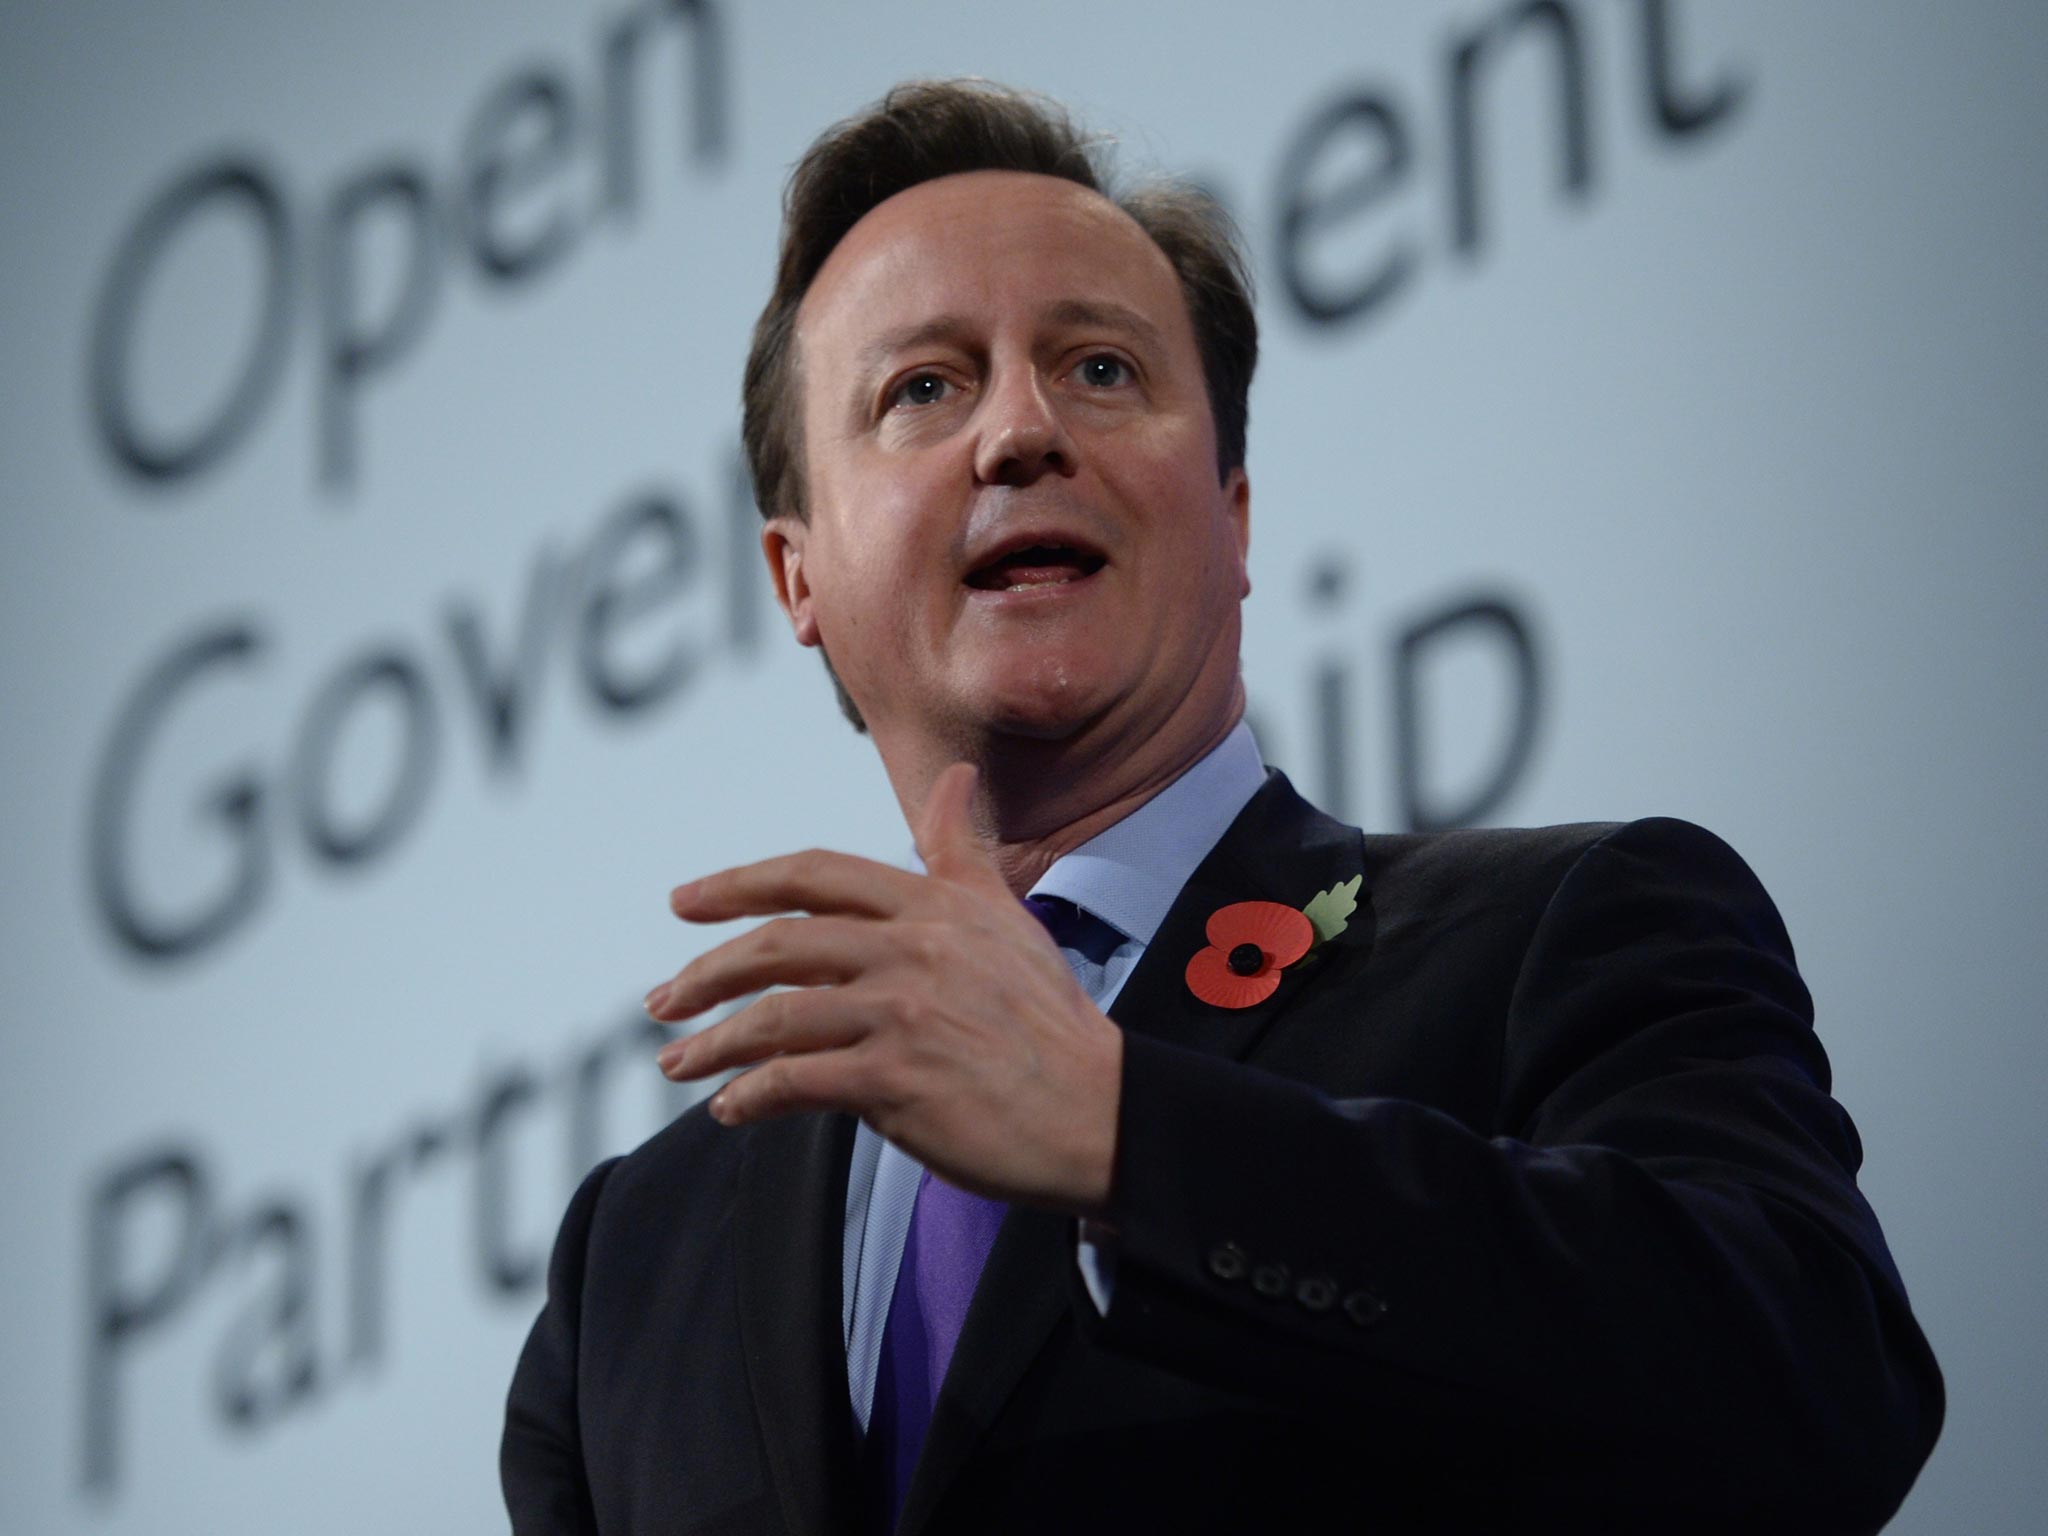 31 October 2013: Prime Minister David Cameron speaks at the Open Government Partnership conference at the QE2 Conference Centre in London